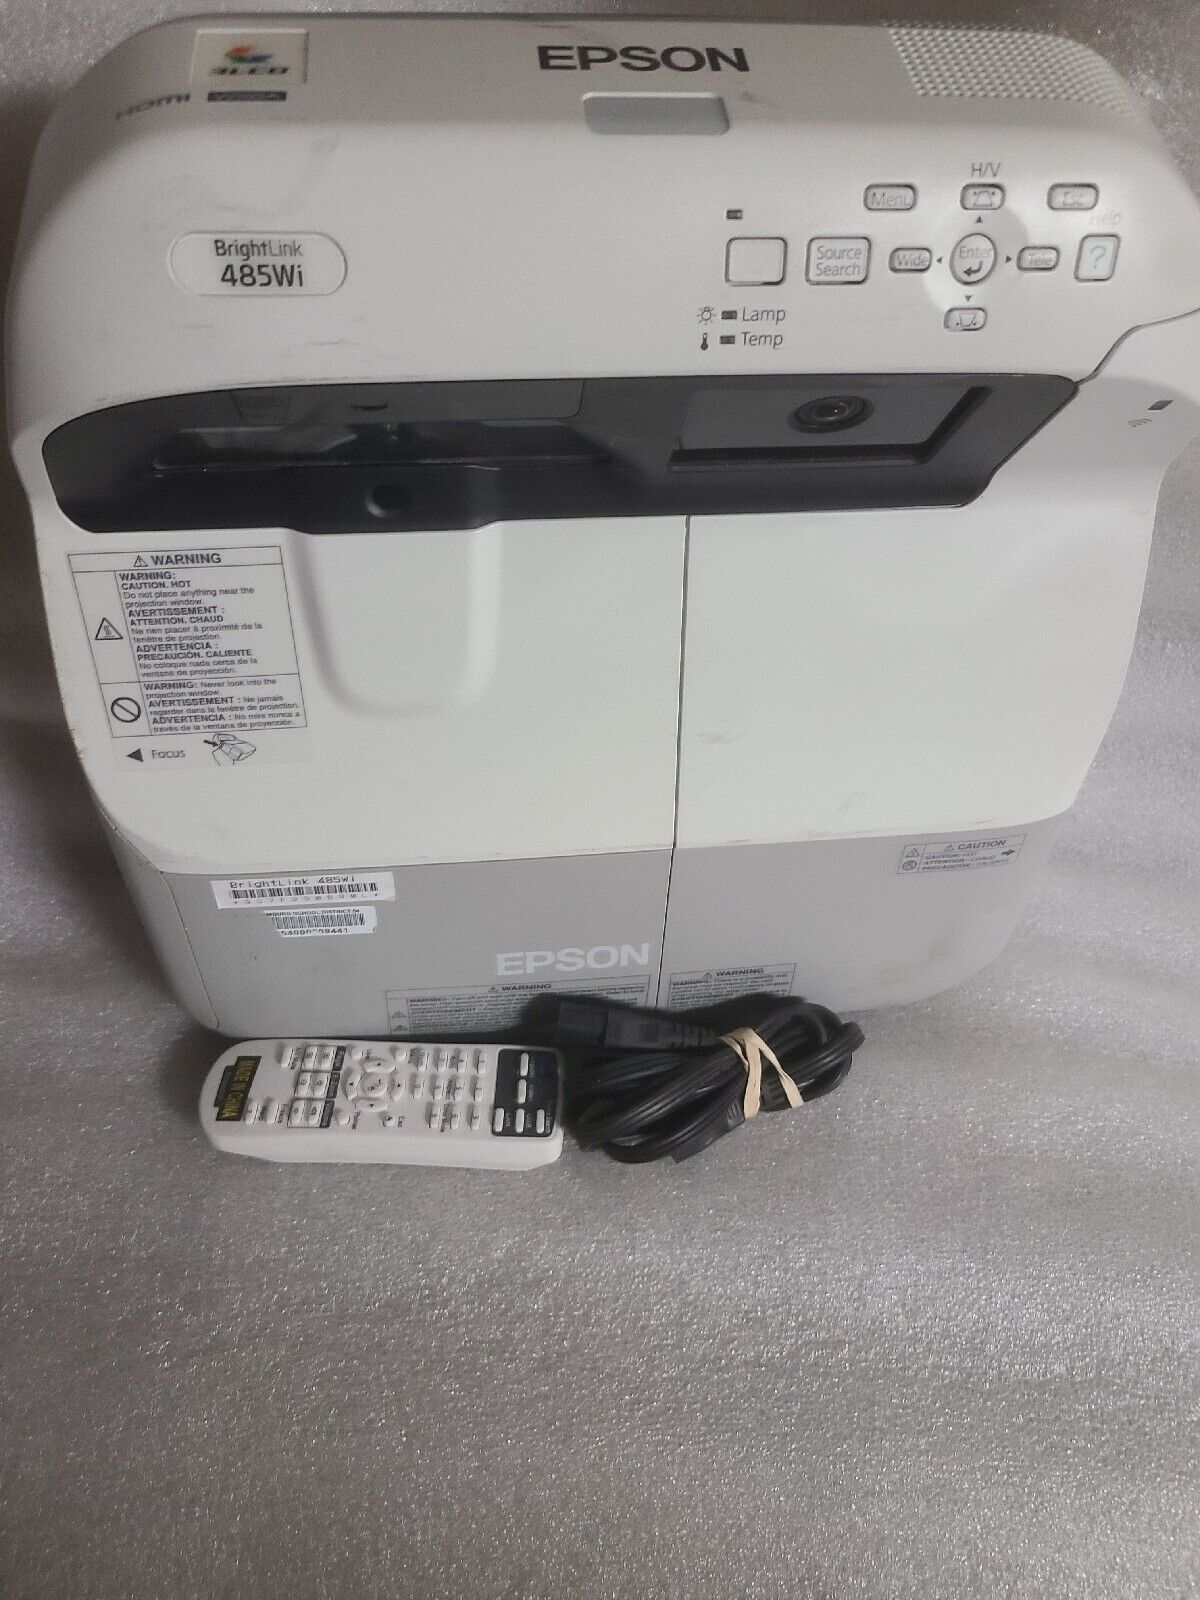 Sewing Epson BrightLink 485Wi LCD Projector w/ Remote  Only Used 31 Hours 